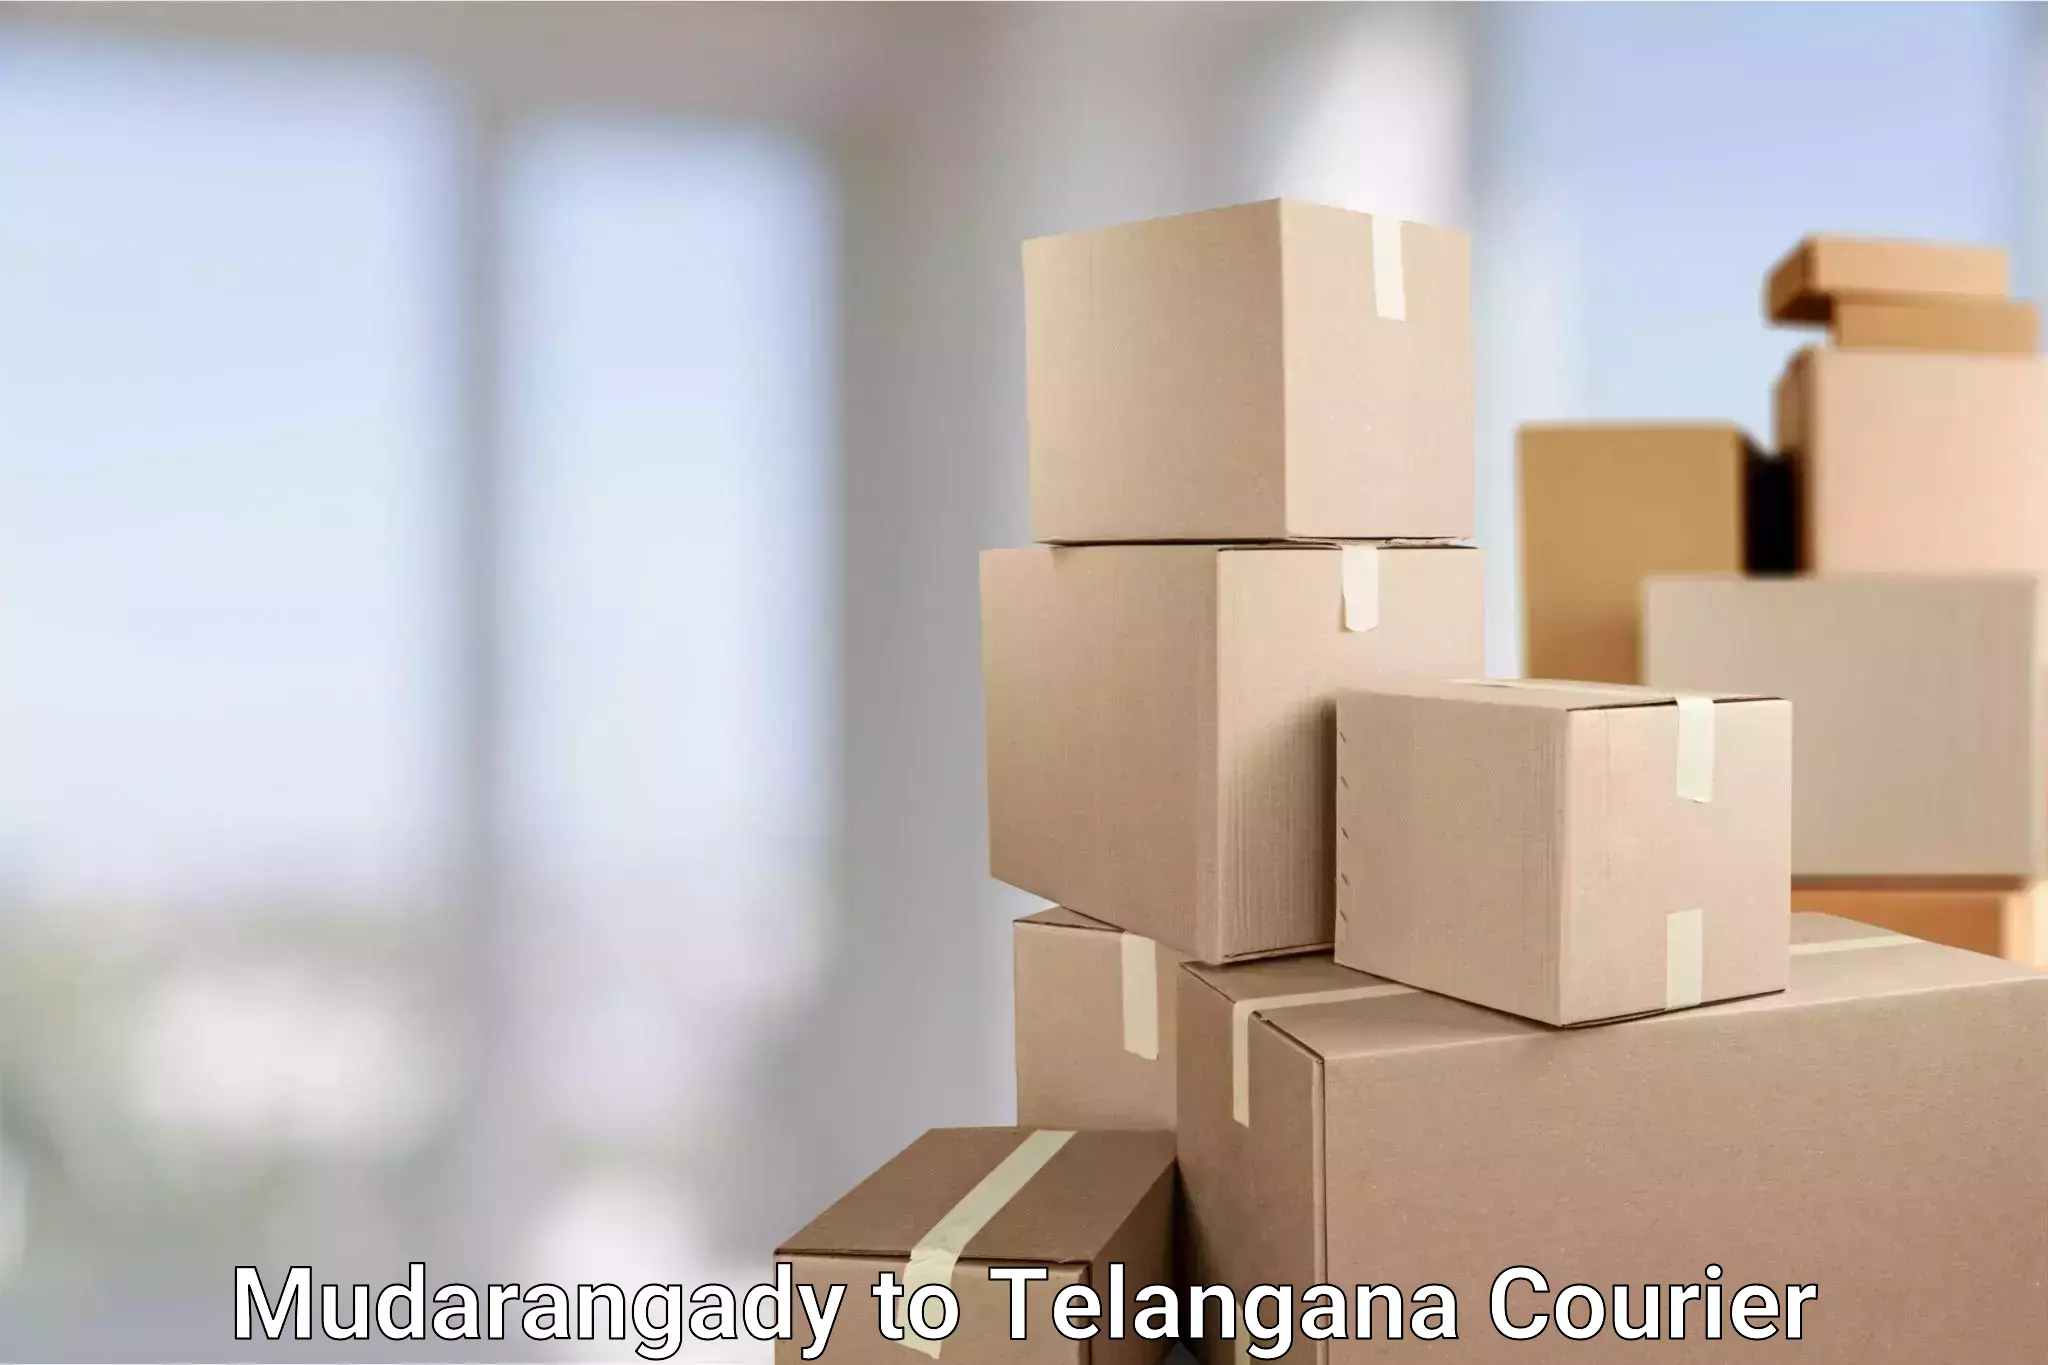 Online package tracking in Mudarangady to Vemulawada